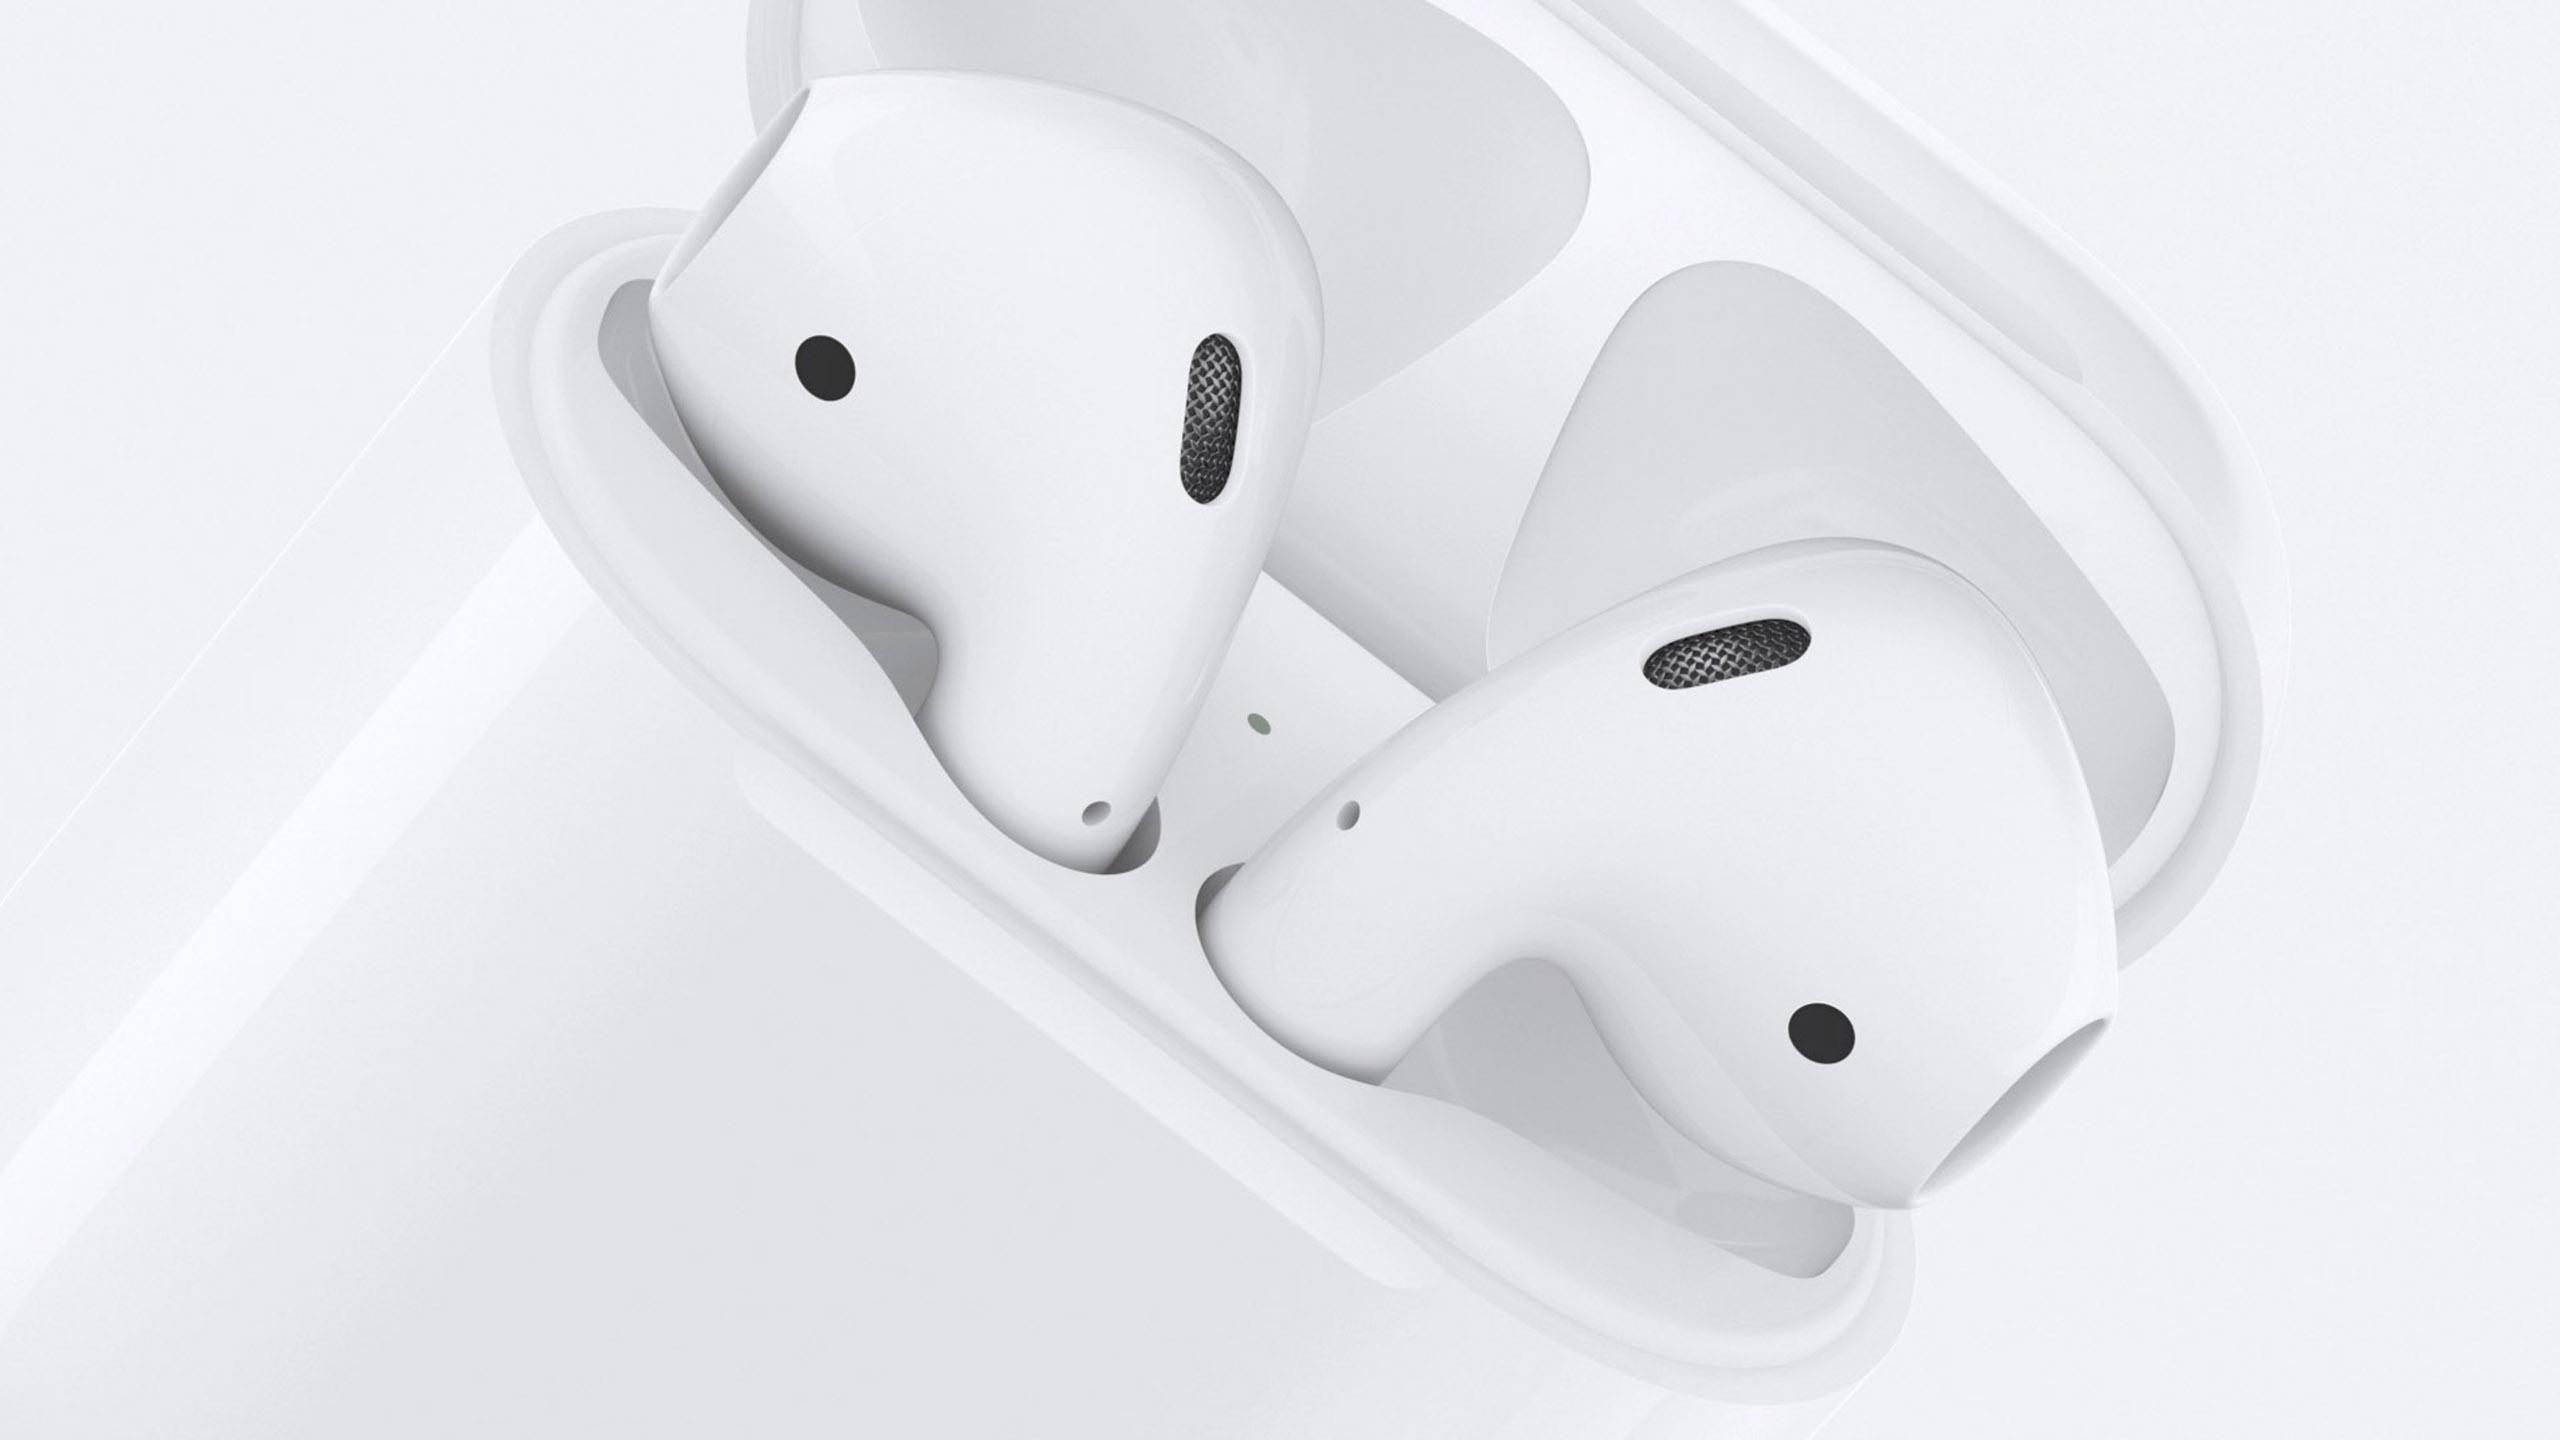 Next Generation AirPods 2 will have Health Monitoring Functions [Report]